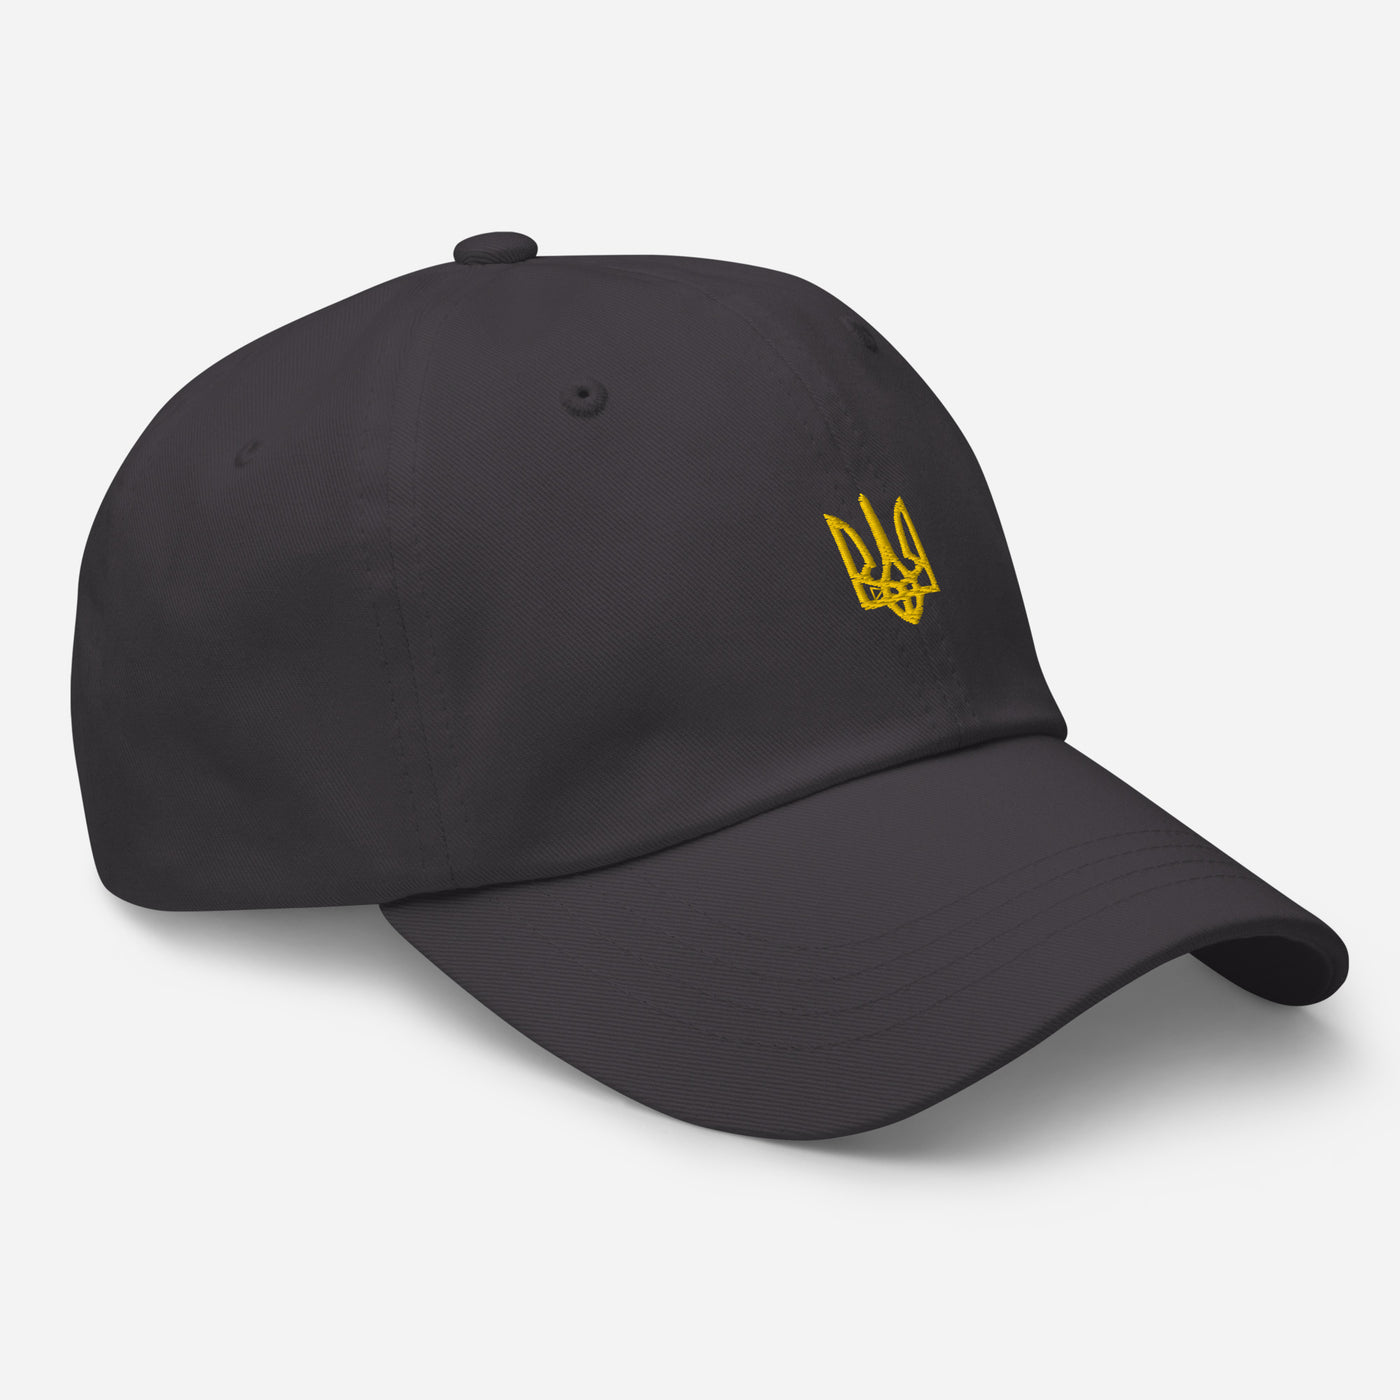 Trident of Freedom Cap Embroidery